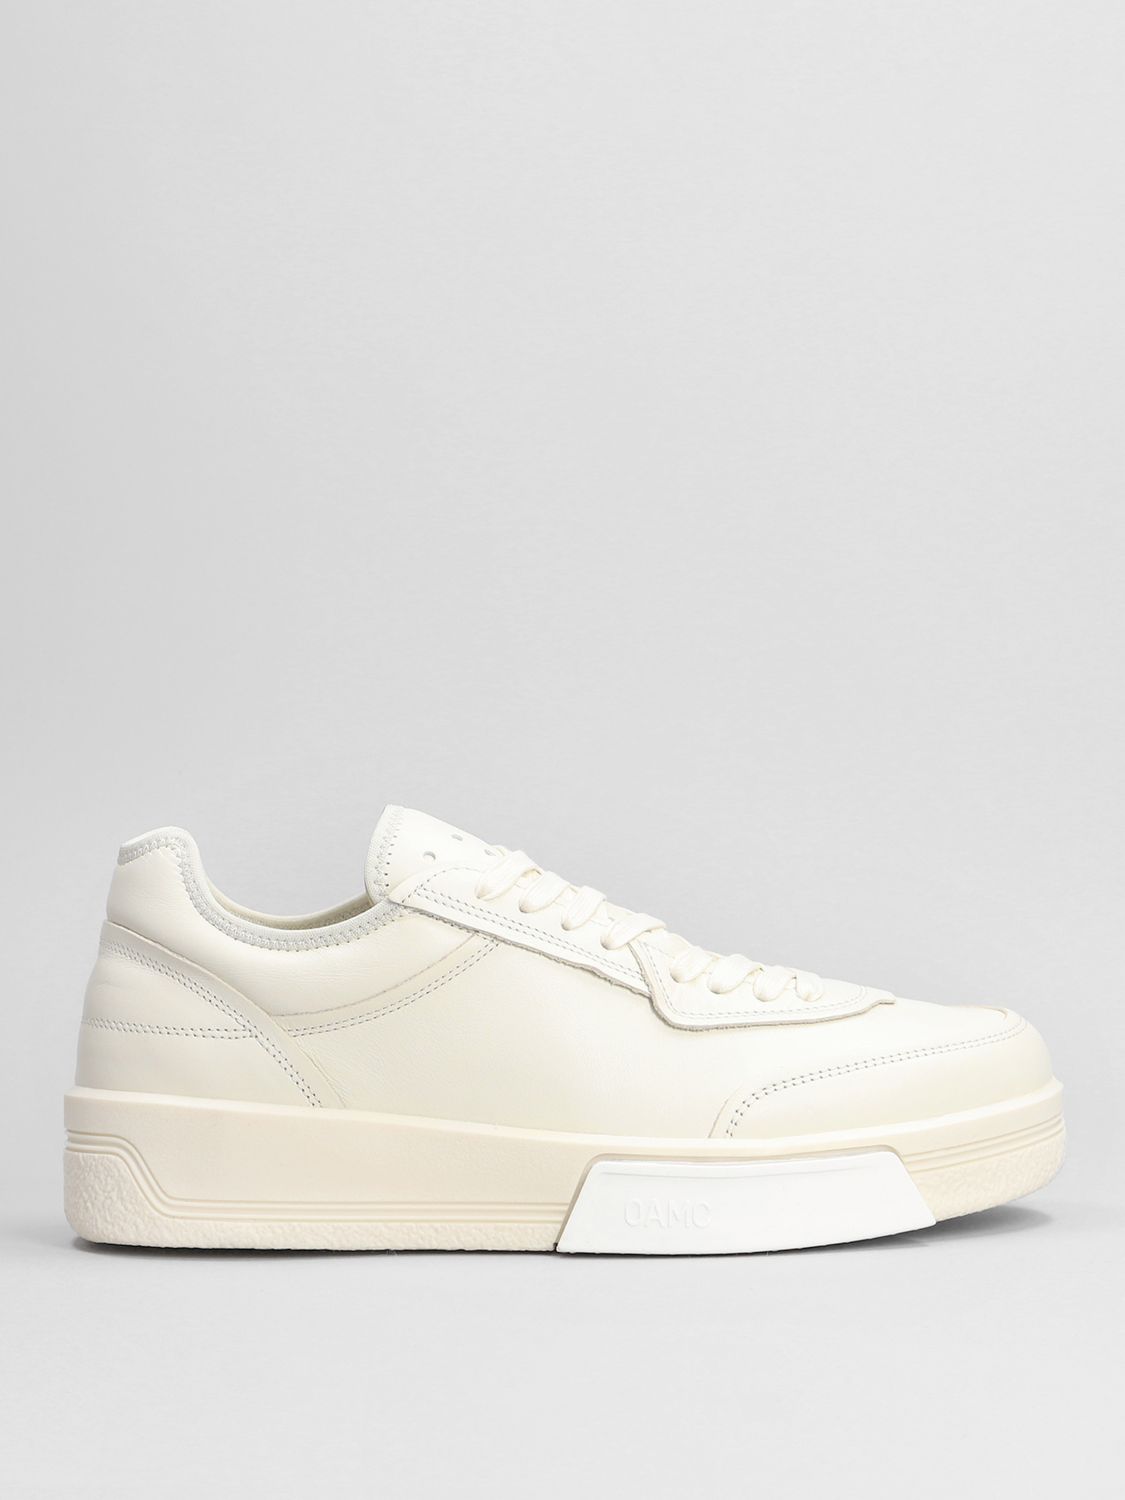 Oamc Cosmos Trainers In White Leather